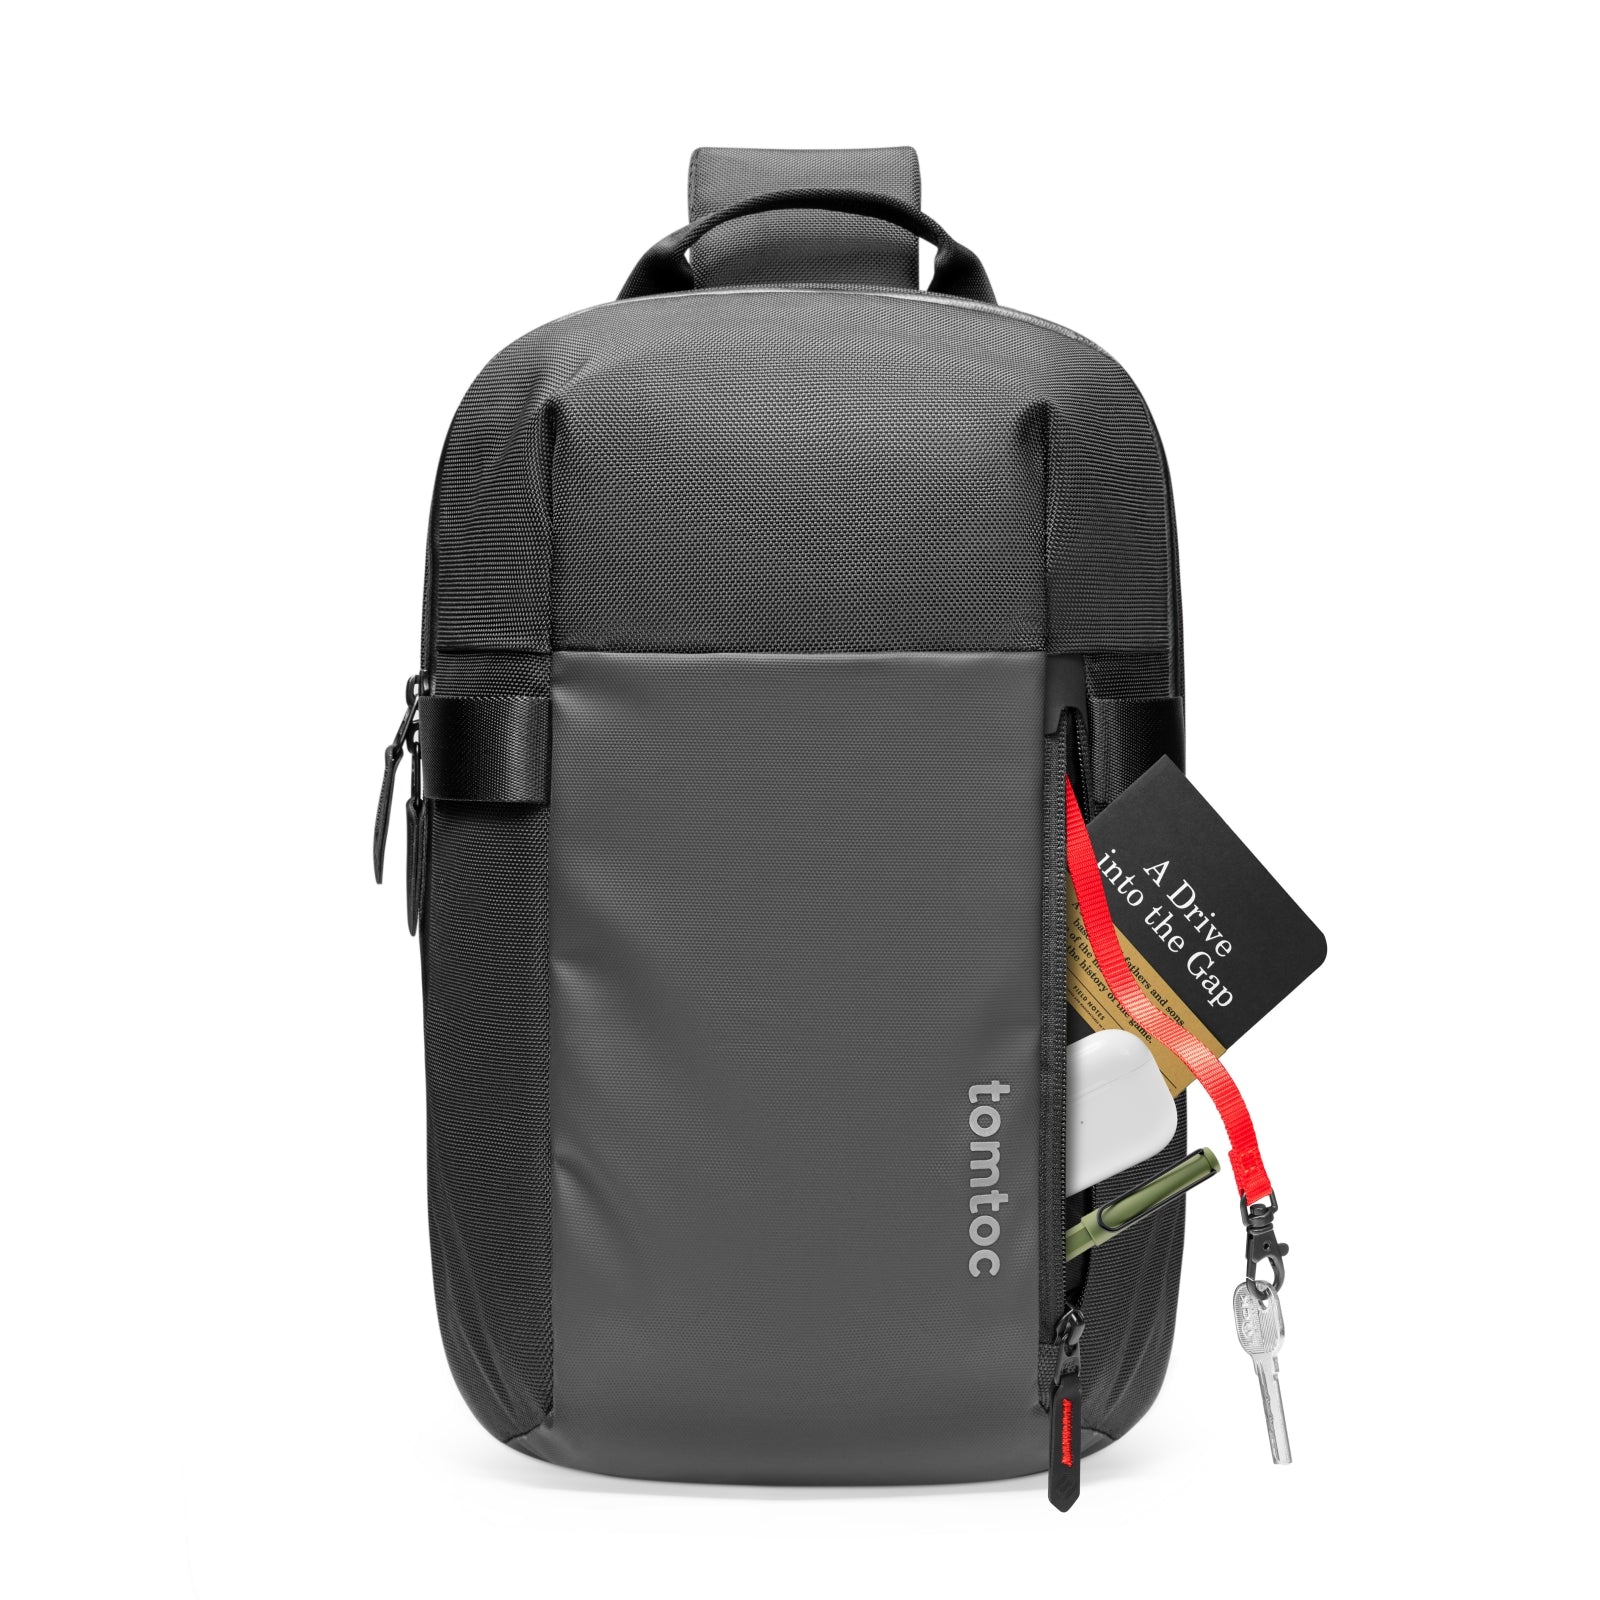 Navigator-T68 Laptop Backpack with 15.6 Inch & 26L